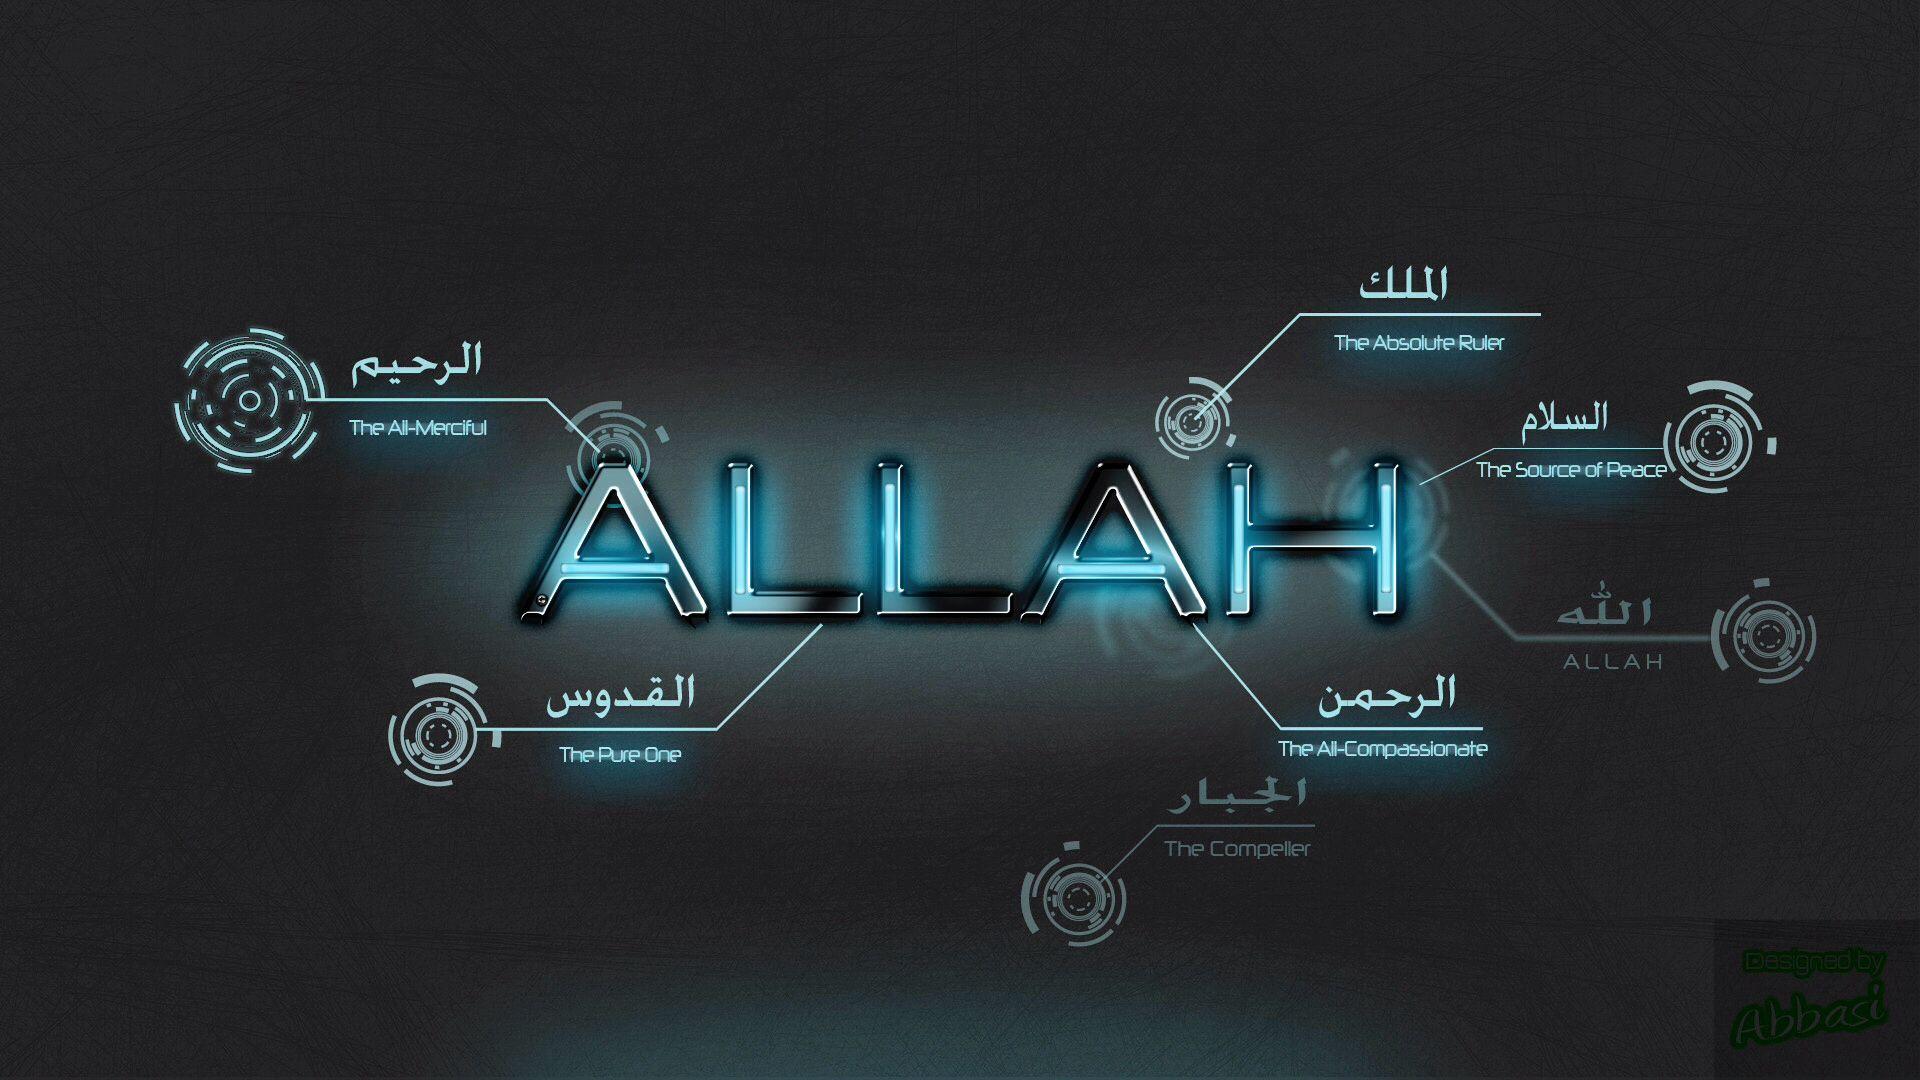 Allah wallpaper soo cool!. M U S L I M I'm so blessed to be